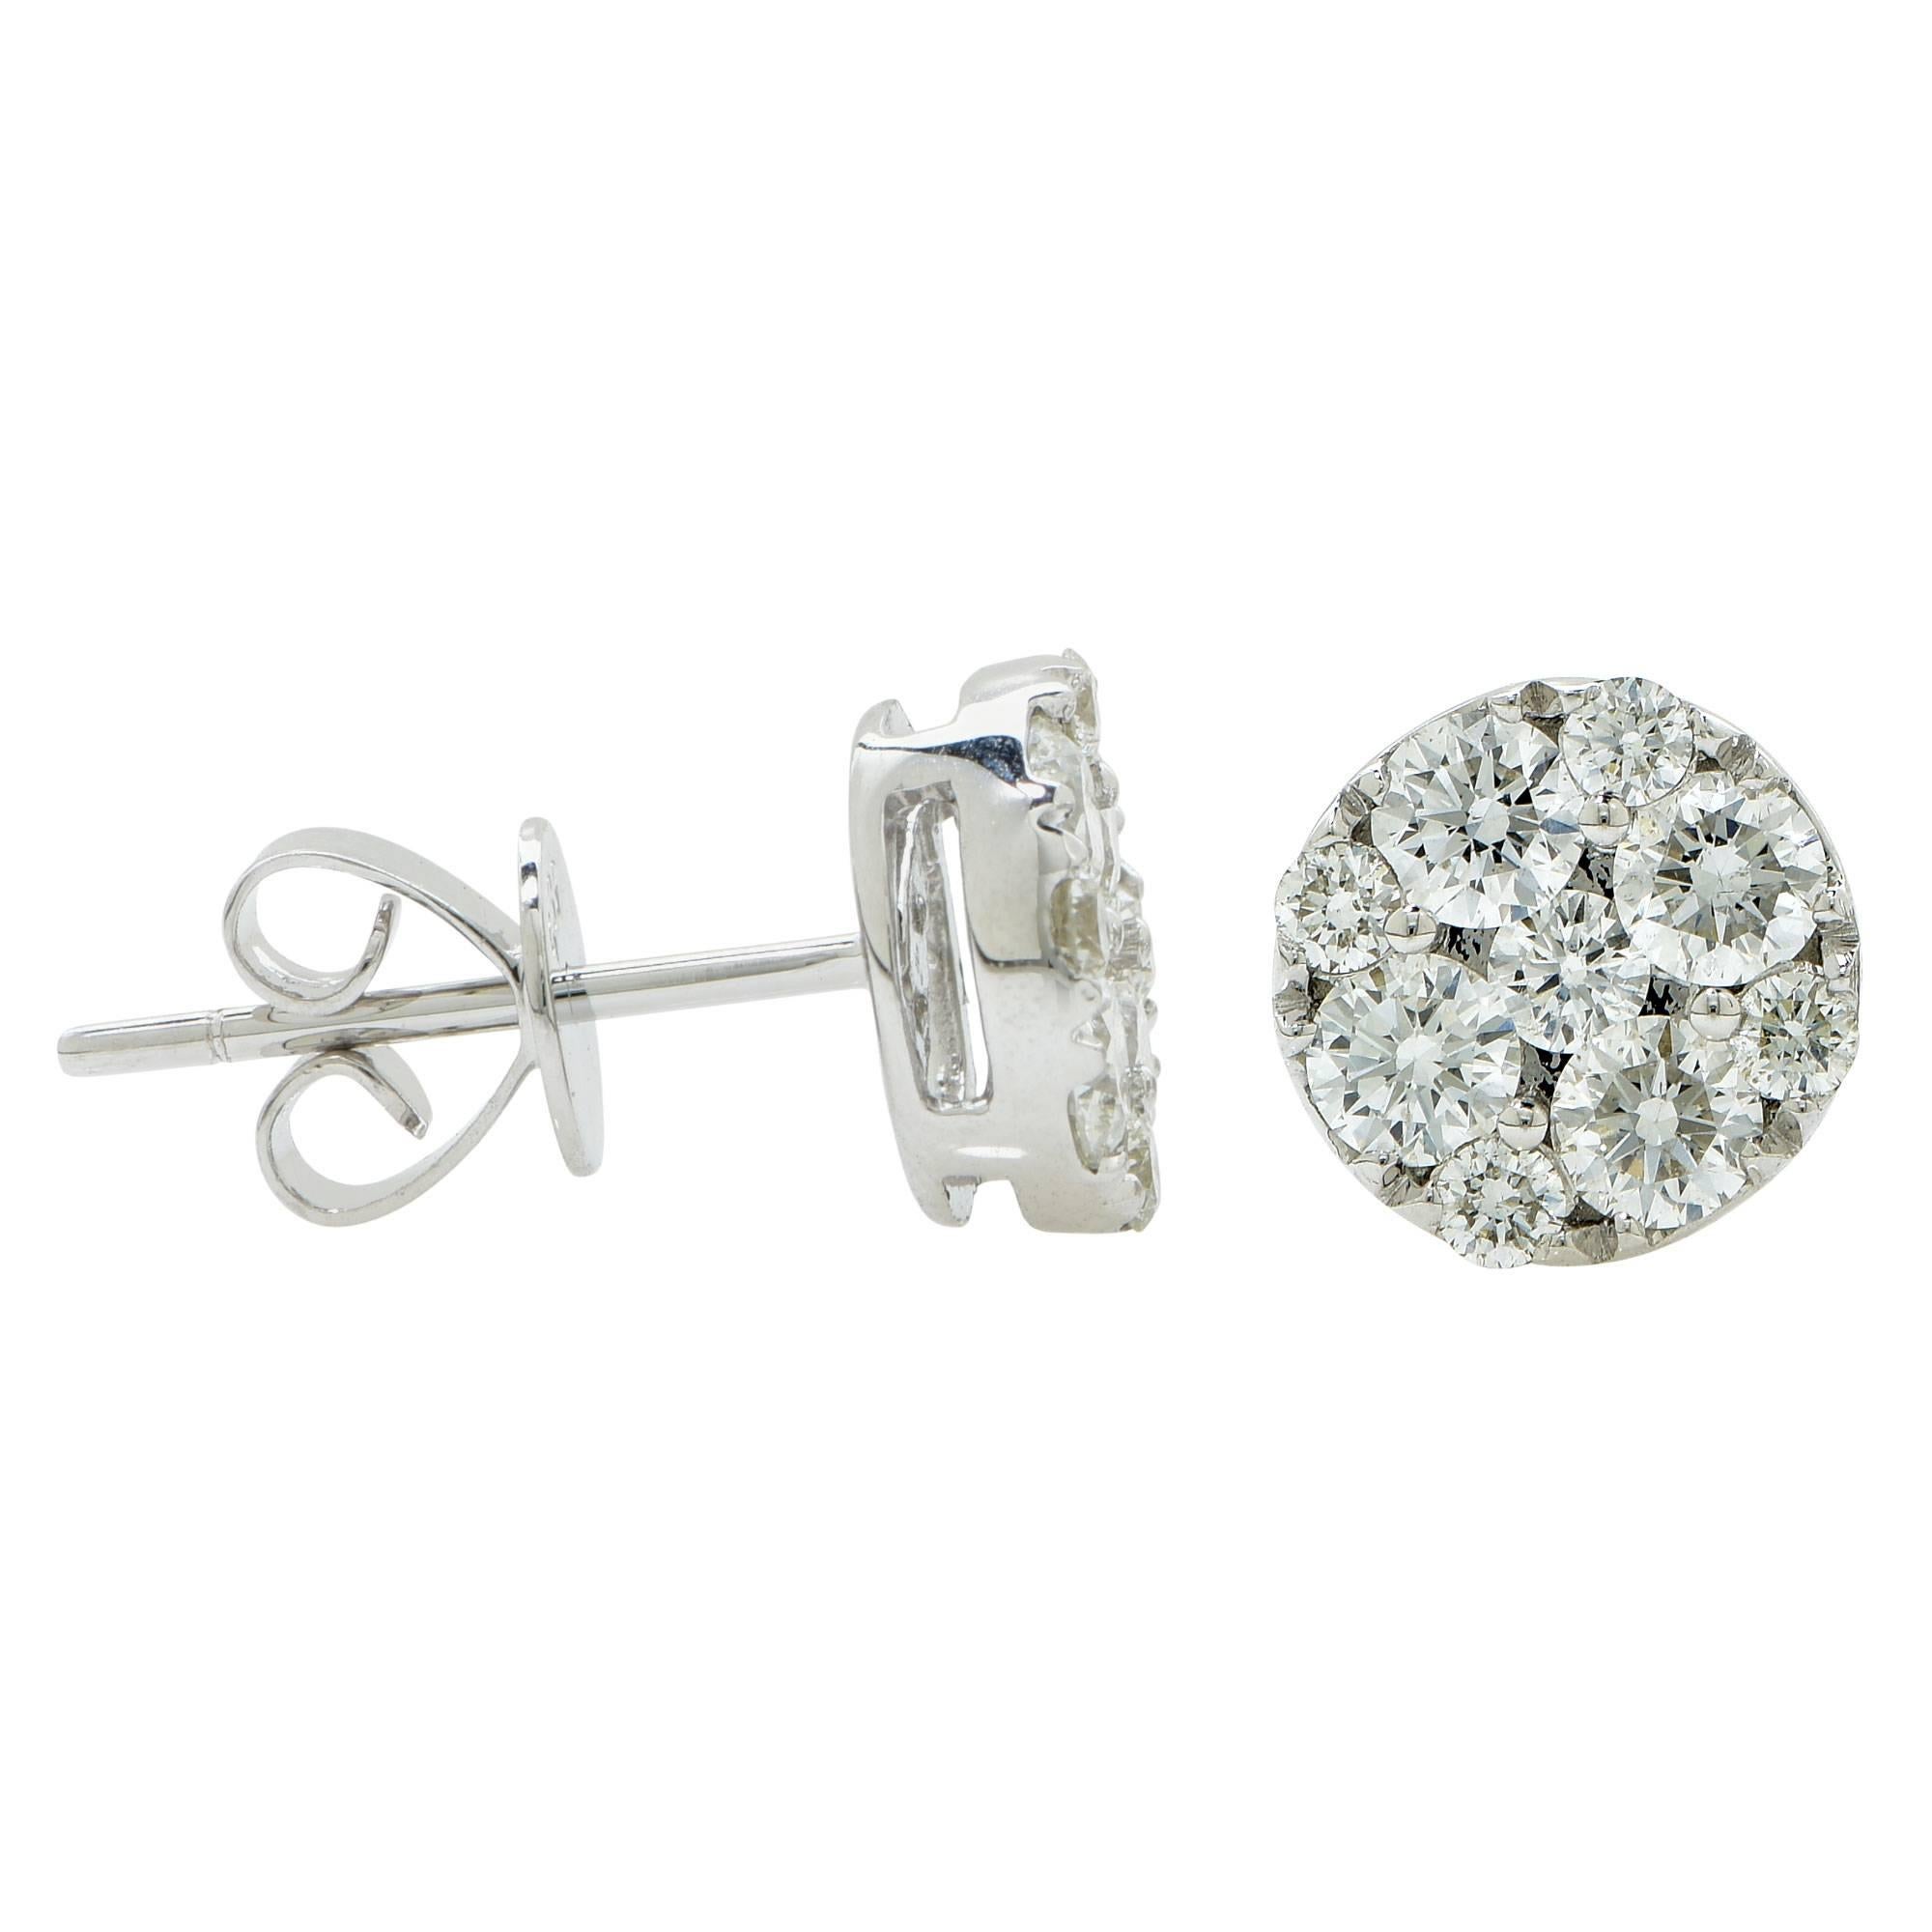 14k white gold cluster stud earrings featuring 18 round brilliant cut diamonds weighing 1ct total G color VS clarity.

It is stamped and tested as 14k gold.
The metal weight is 1.86 grams.

These diamond earrings are accompanied by a retail